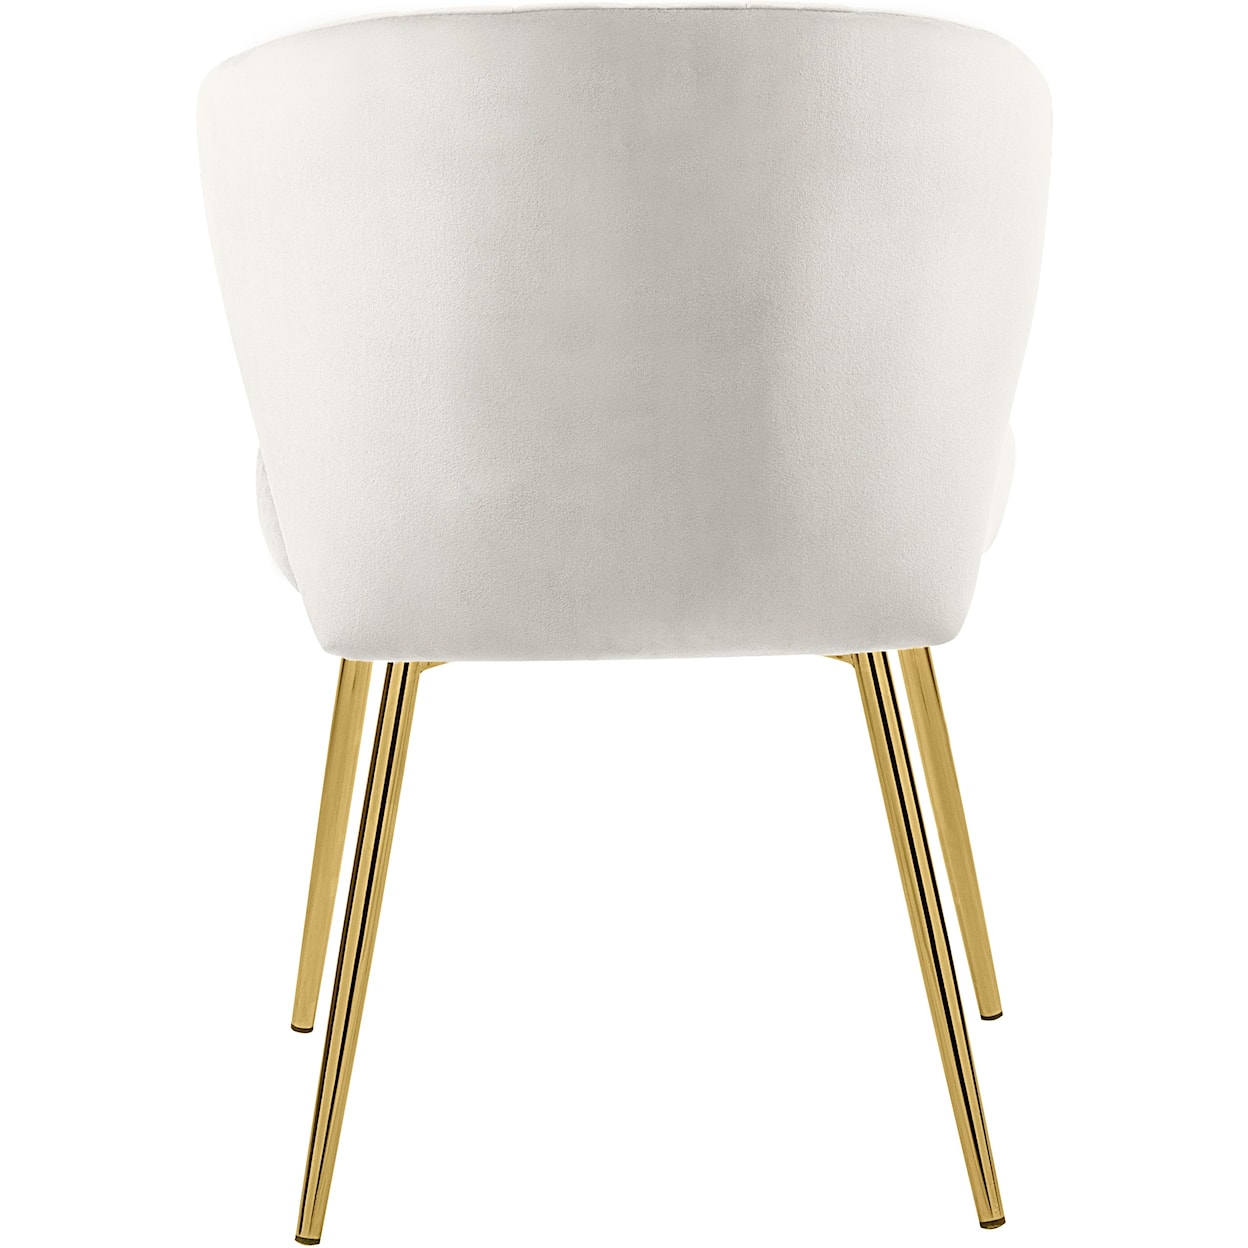 Meridian Furniture Finley 707cream Contemporary Cream Velvet Dining Chair With Gold Legs